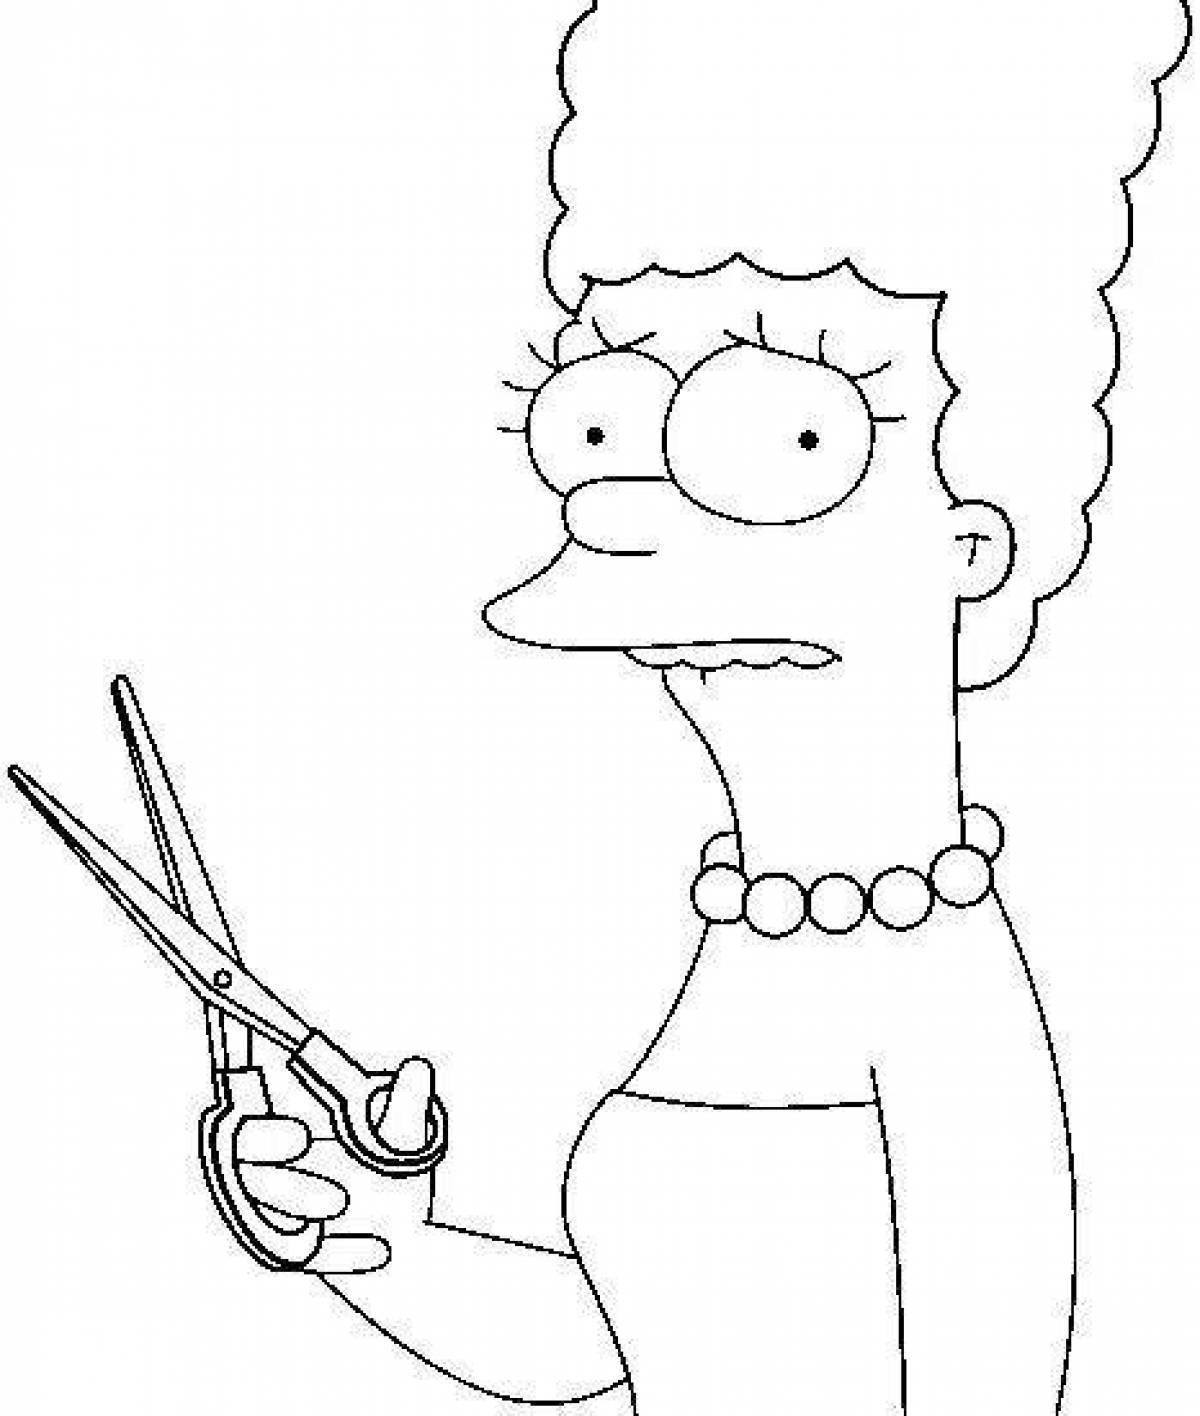 Marge simpson playful coloring page